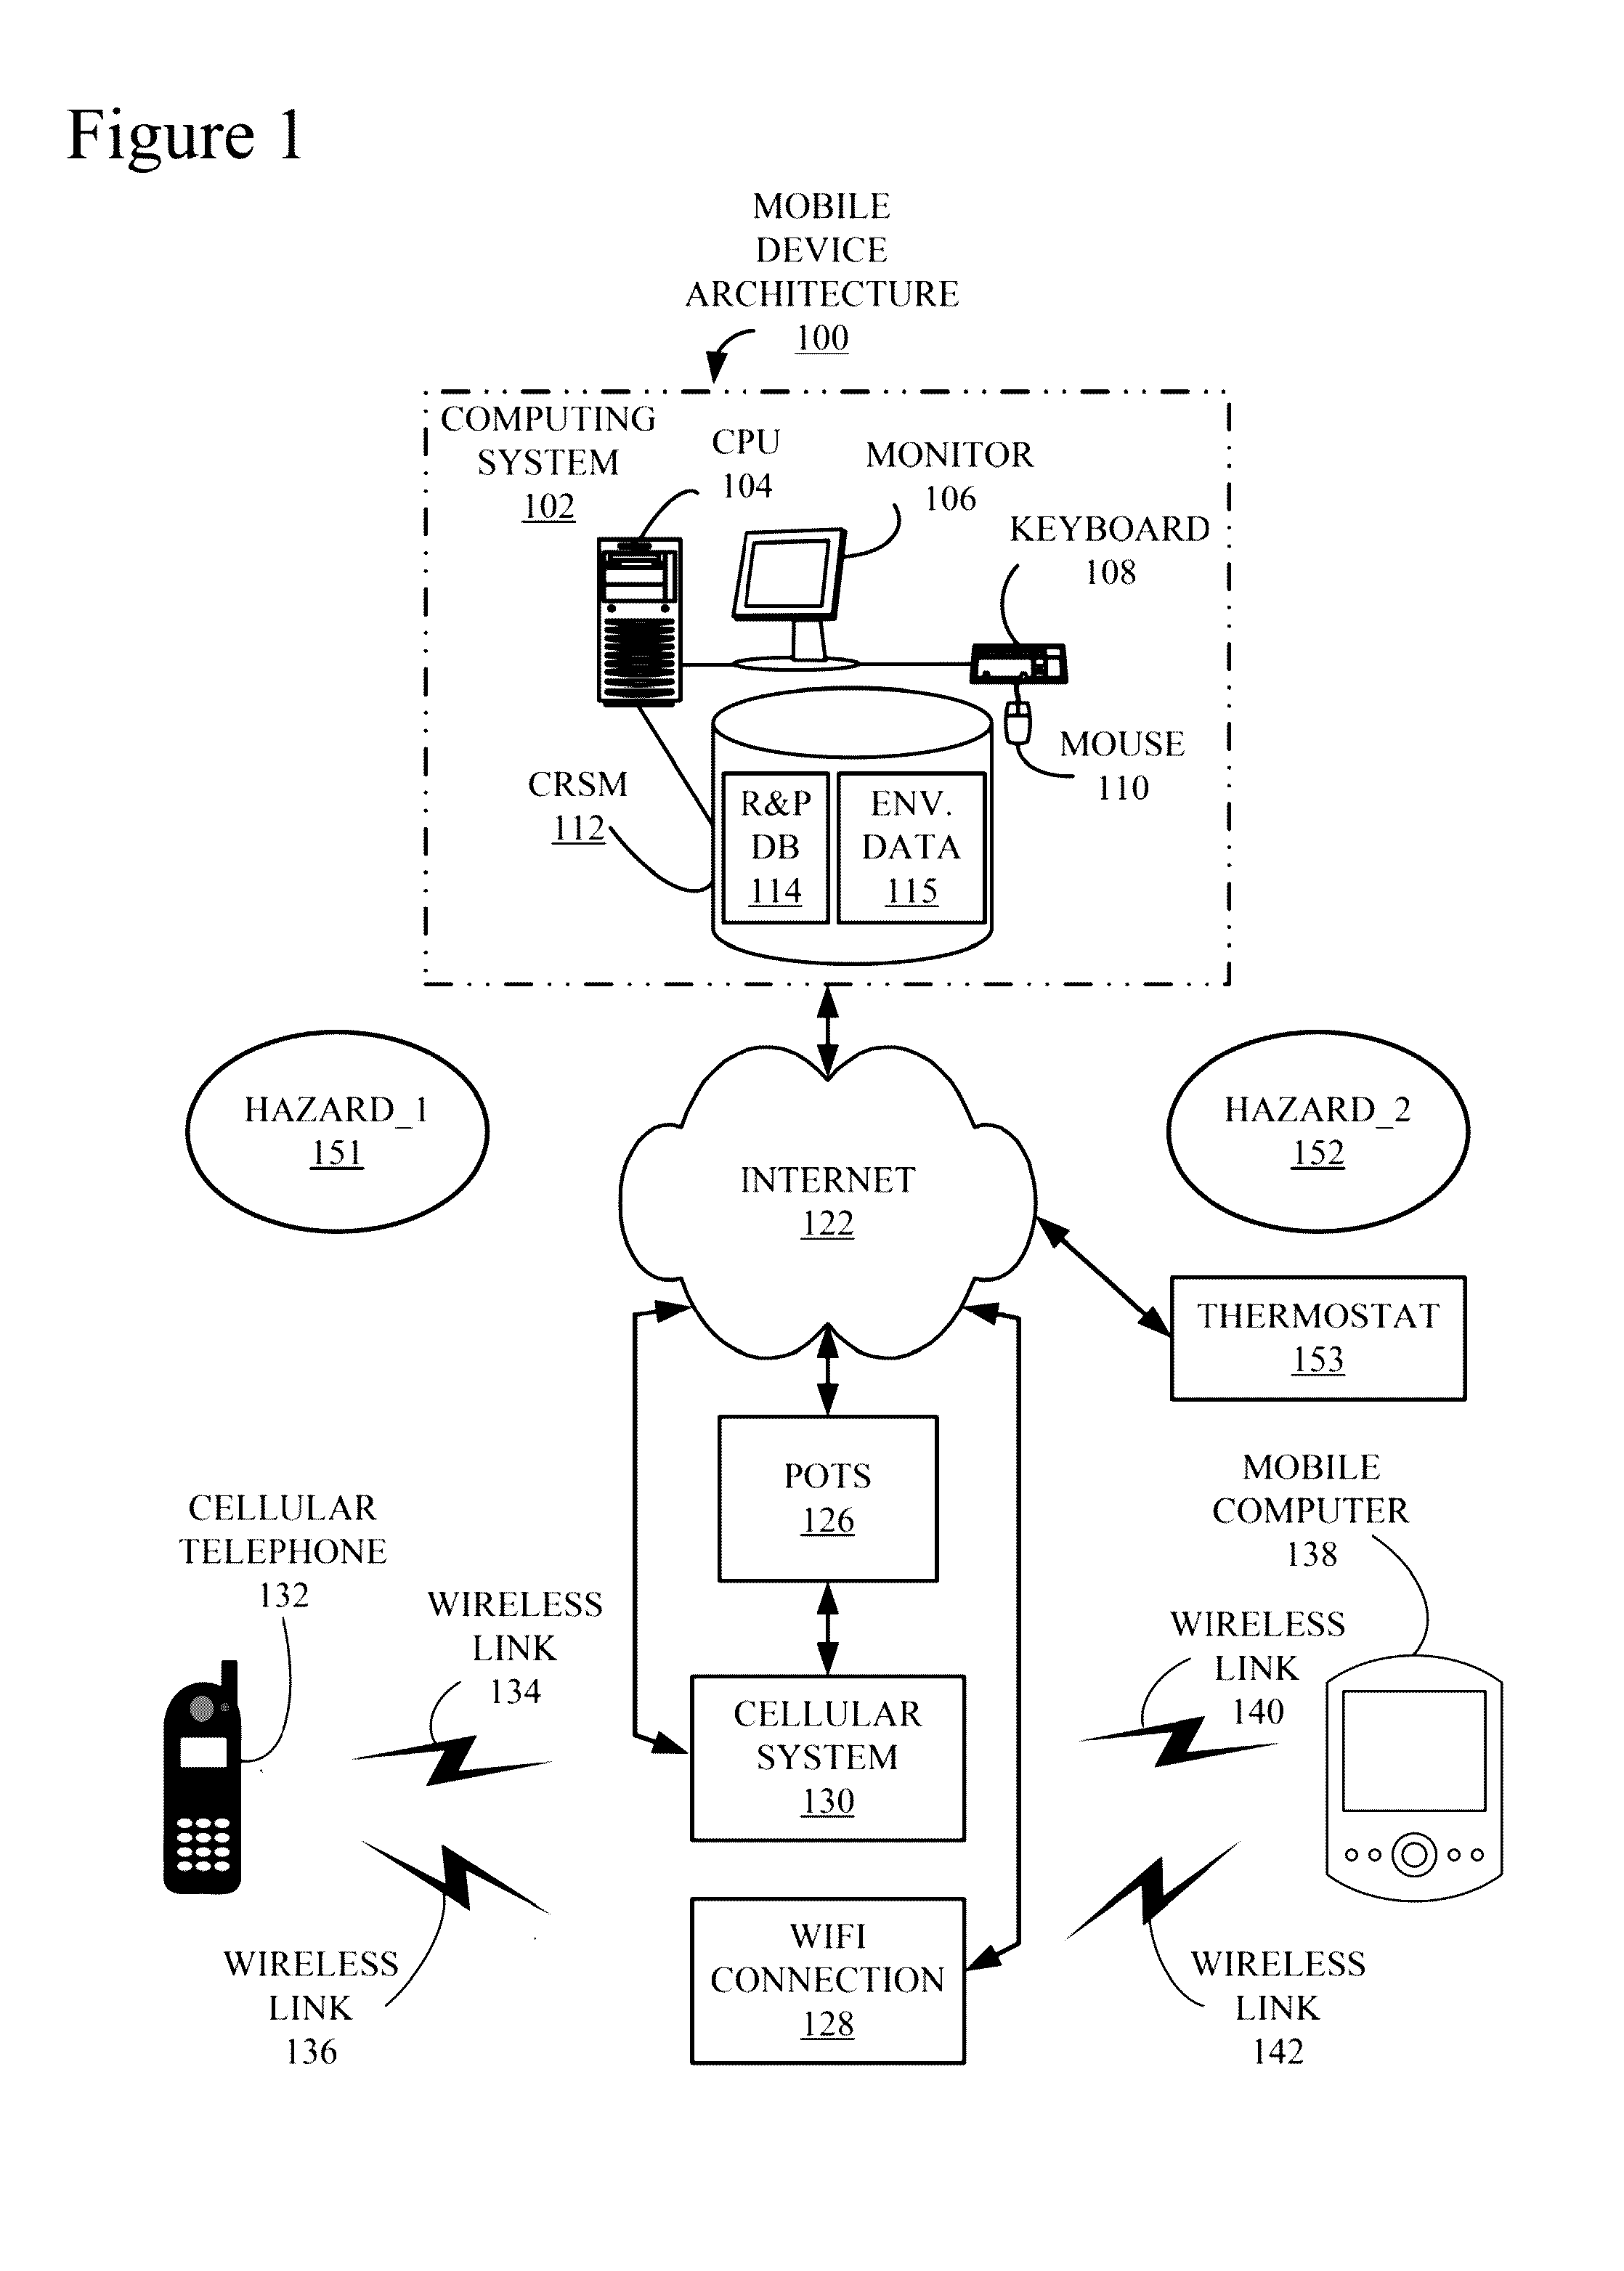 Automatic Self-Protection for a Portable Electronic Device